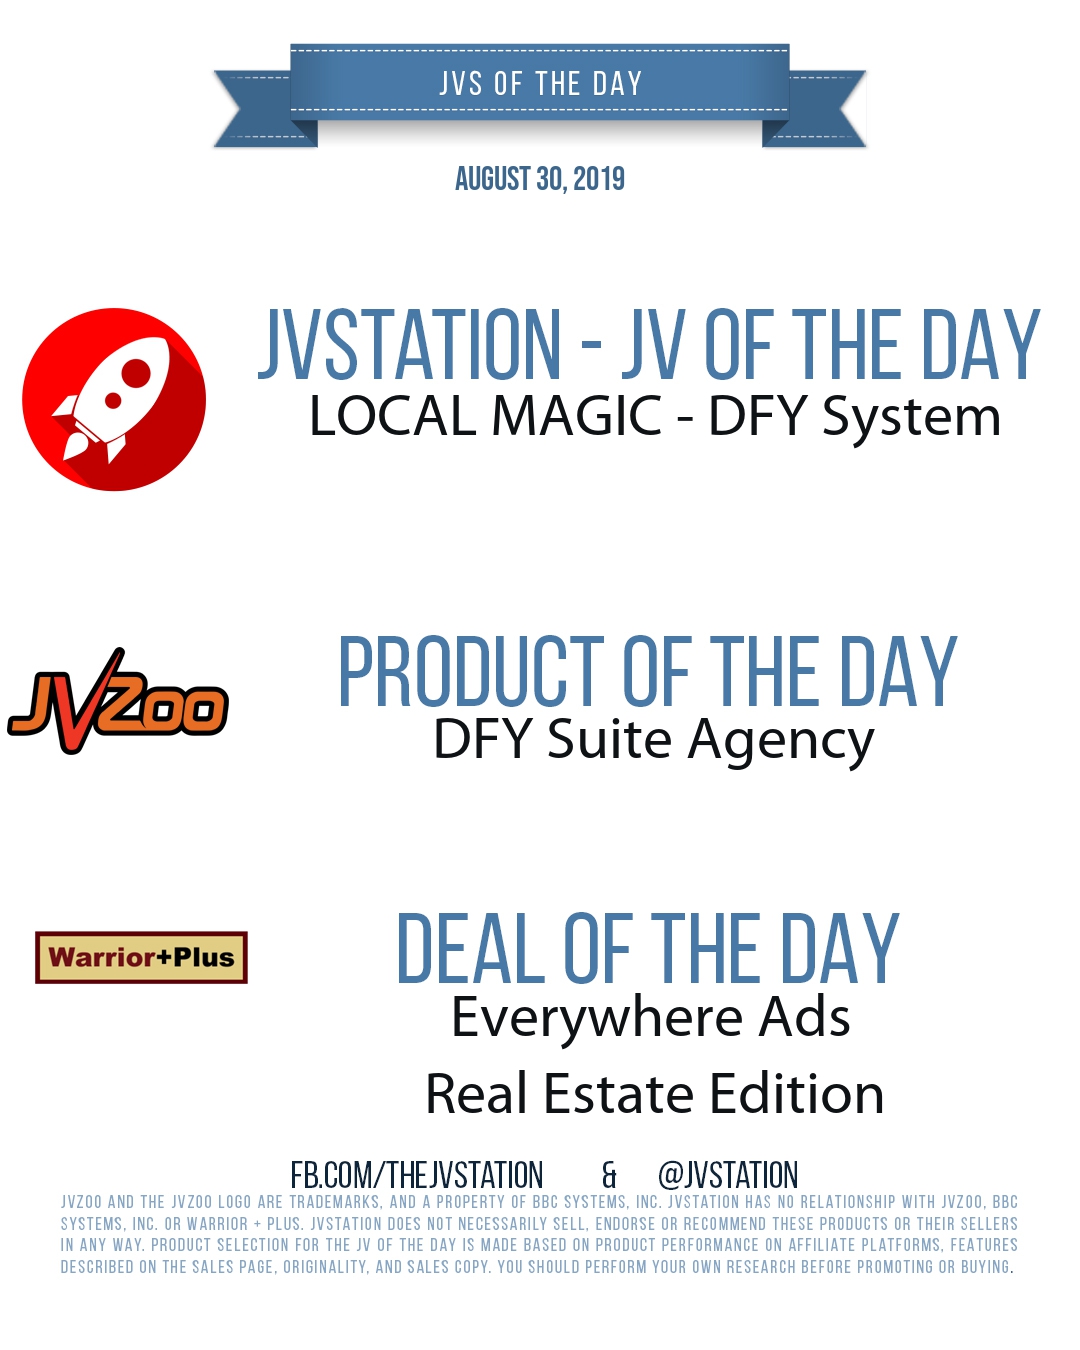 JVs of the day - August 30, 2019